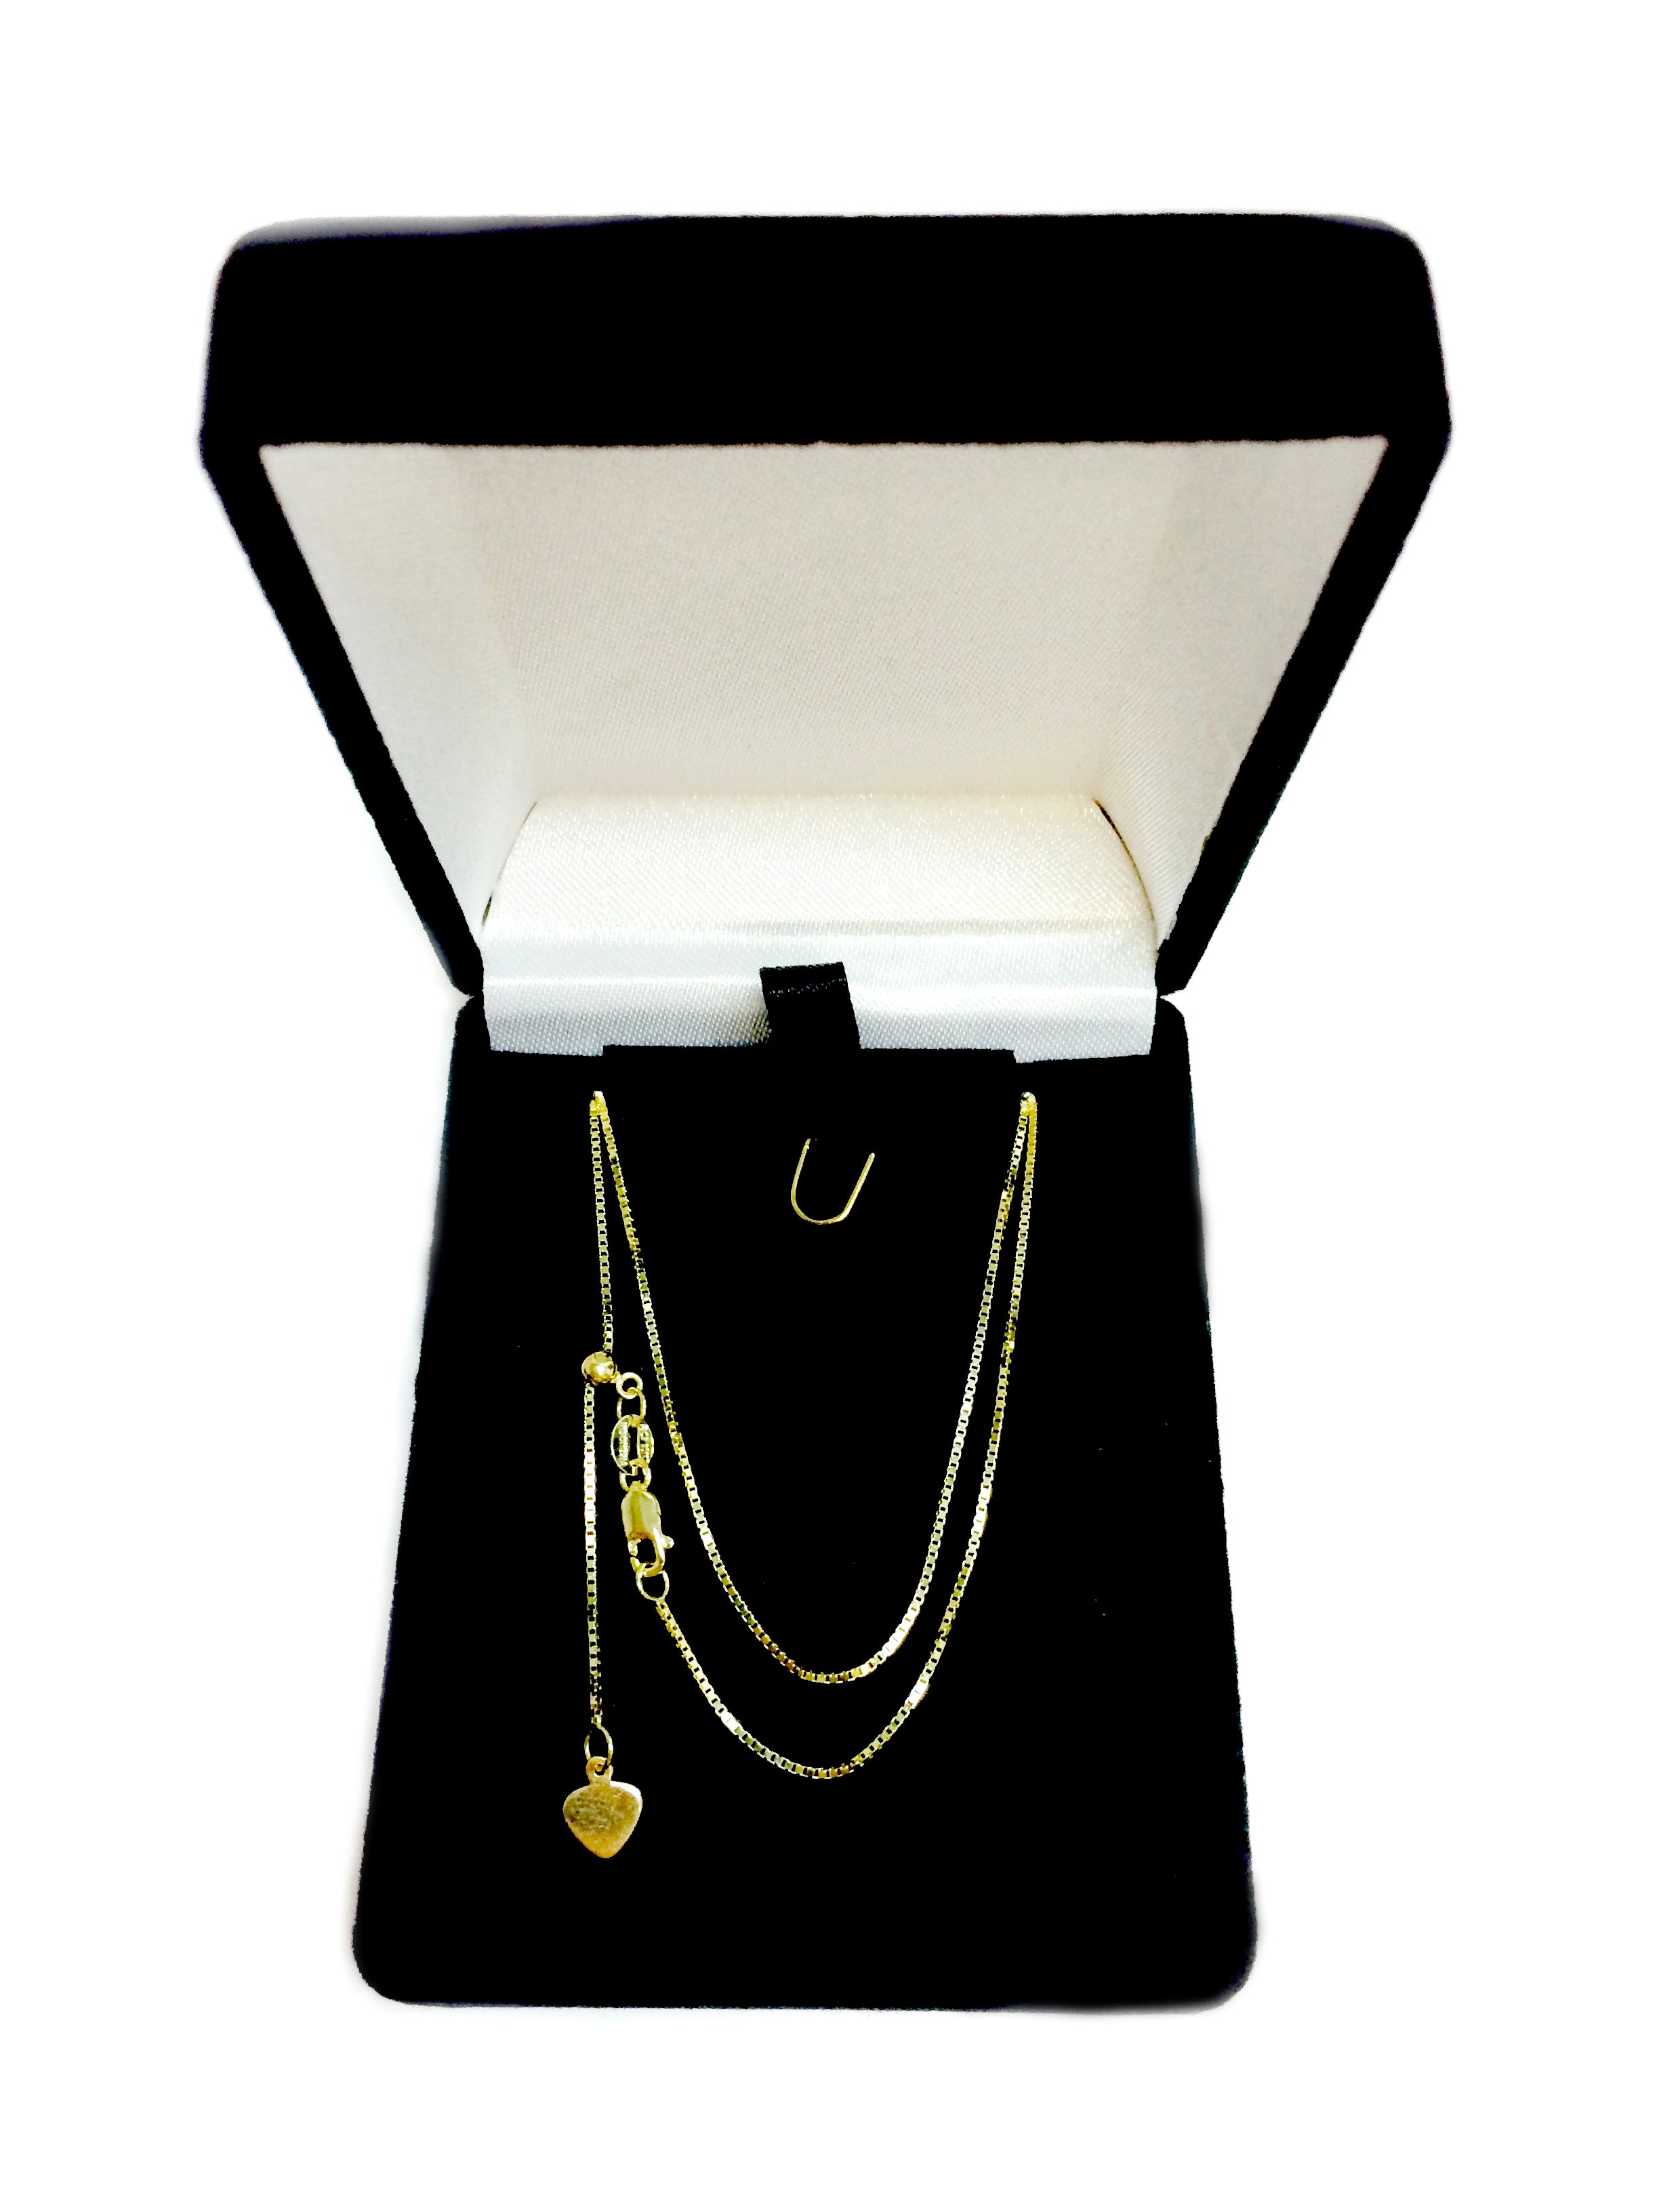 10k Yellow Gold Adjustable Box Link Chain Necklace, 0.7mm, 22"